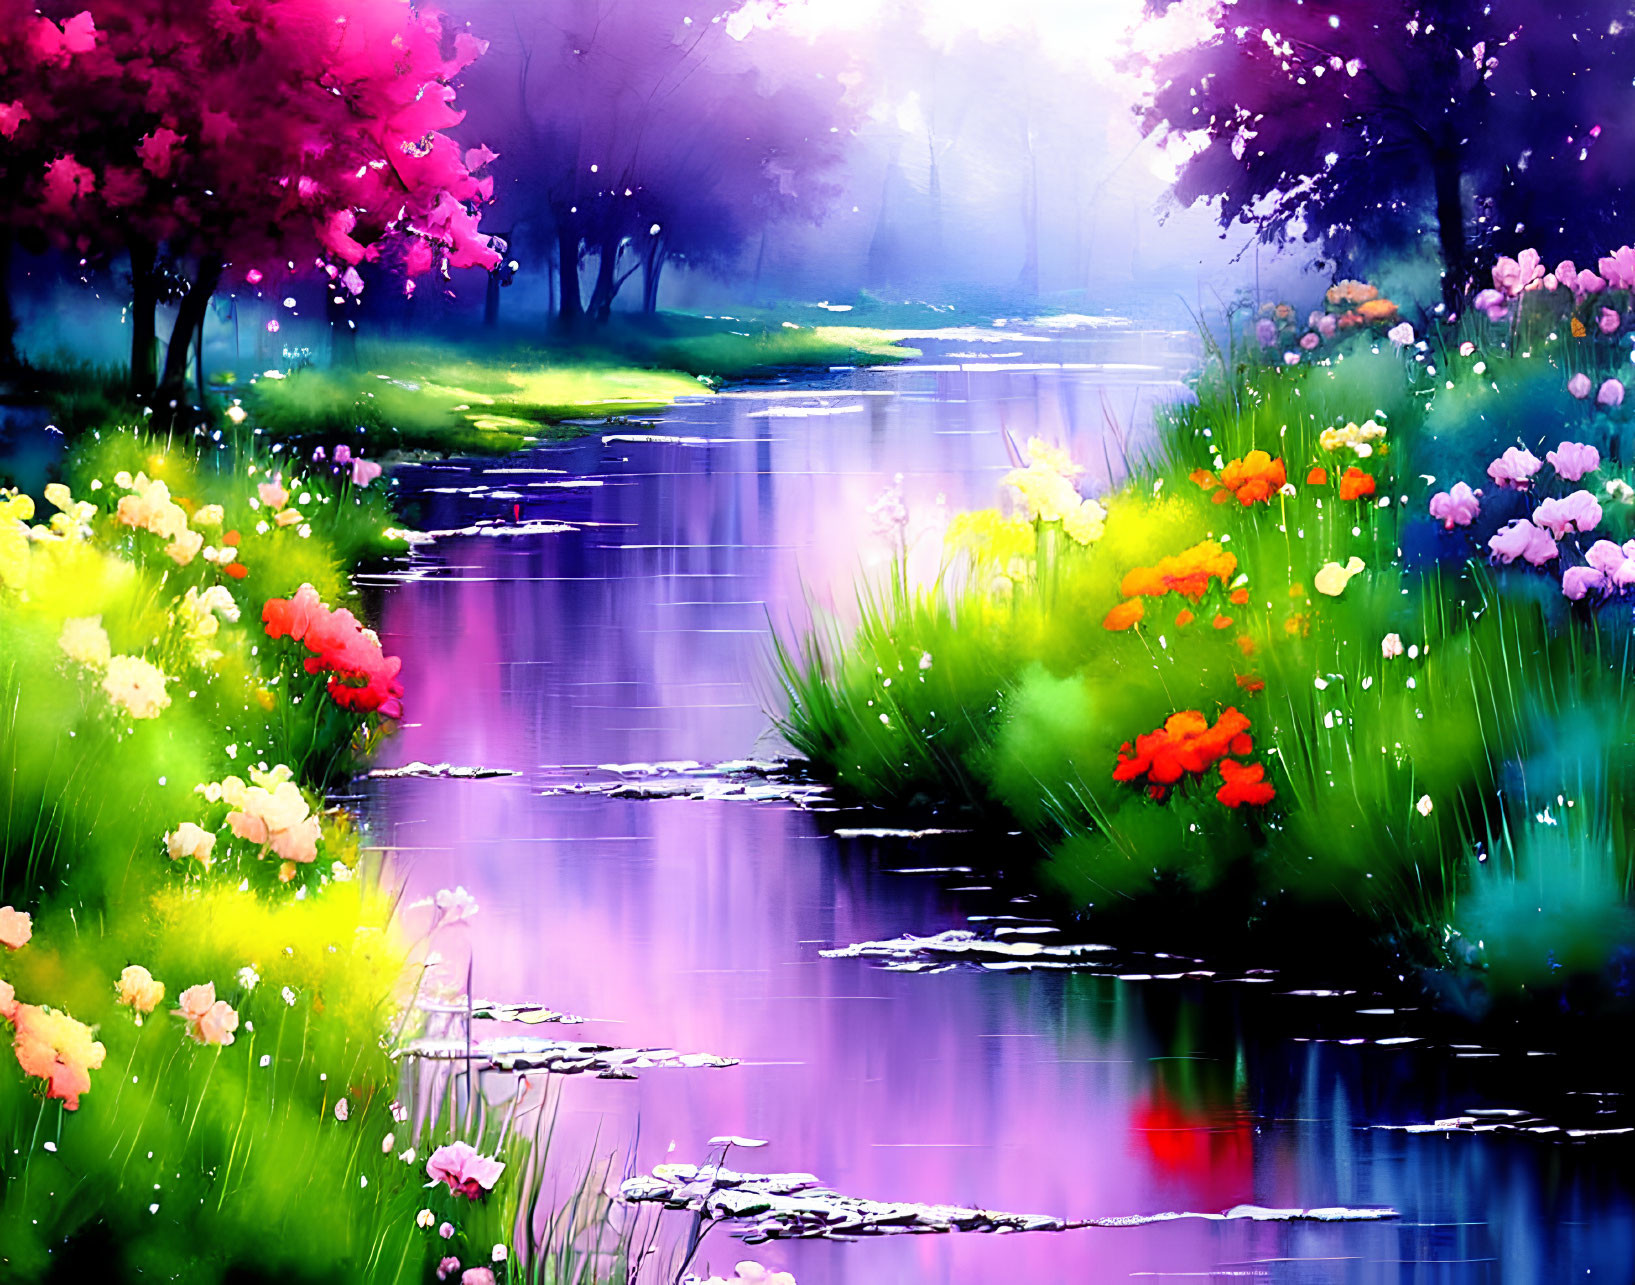 Colorful Stream with Blooming Flowers and Greenery in Misty Background